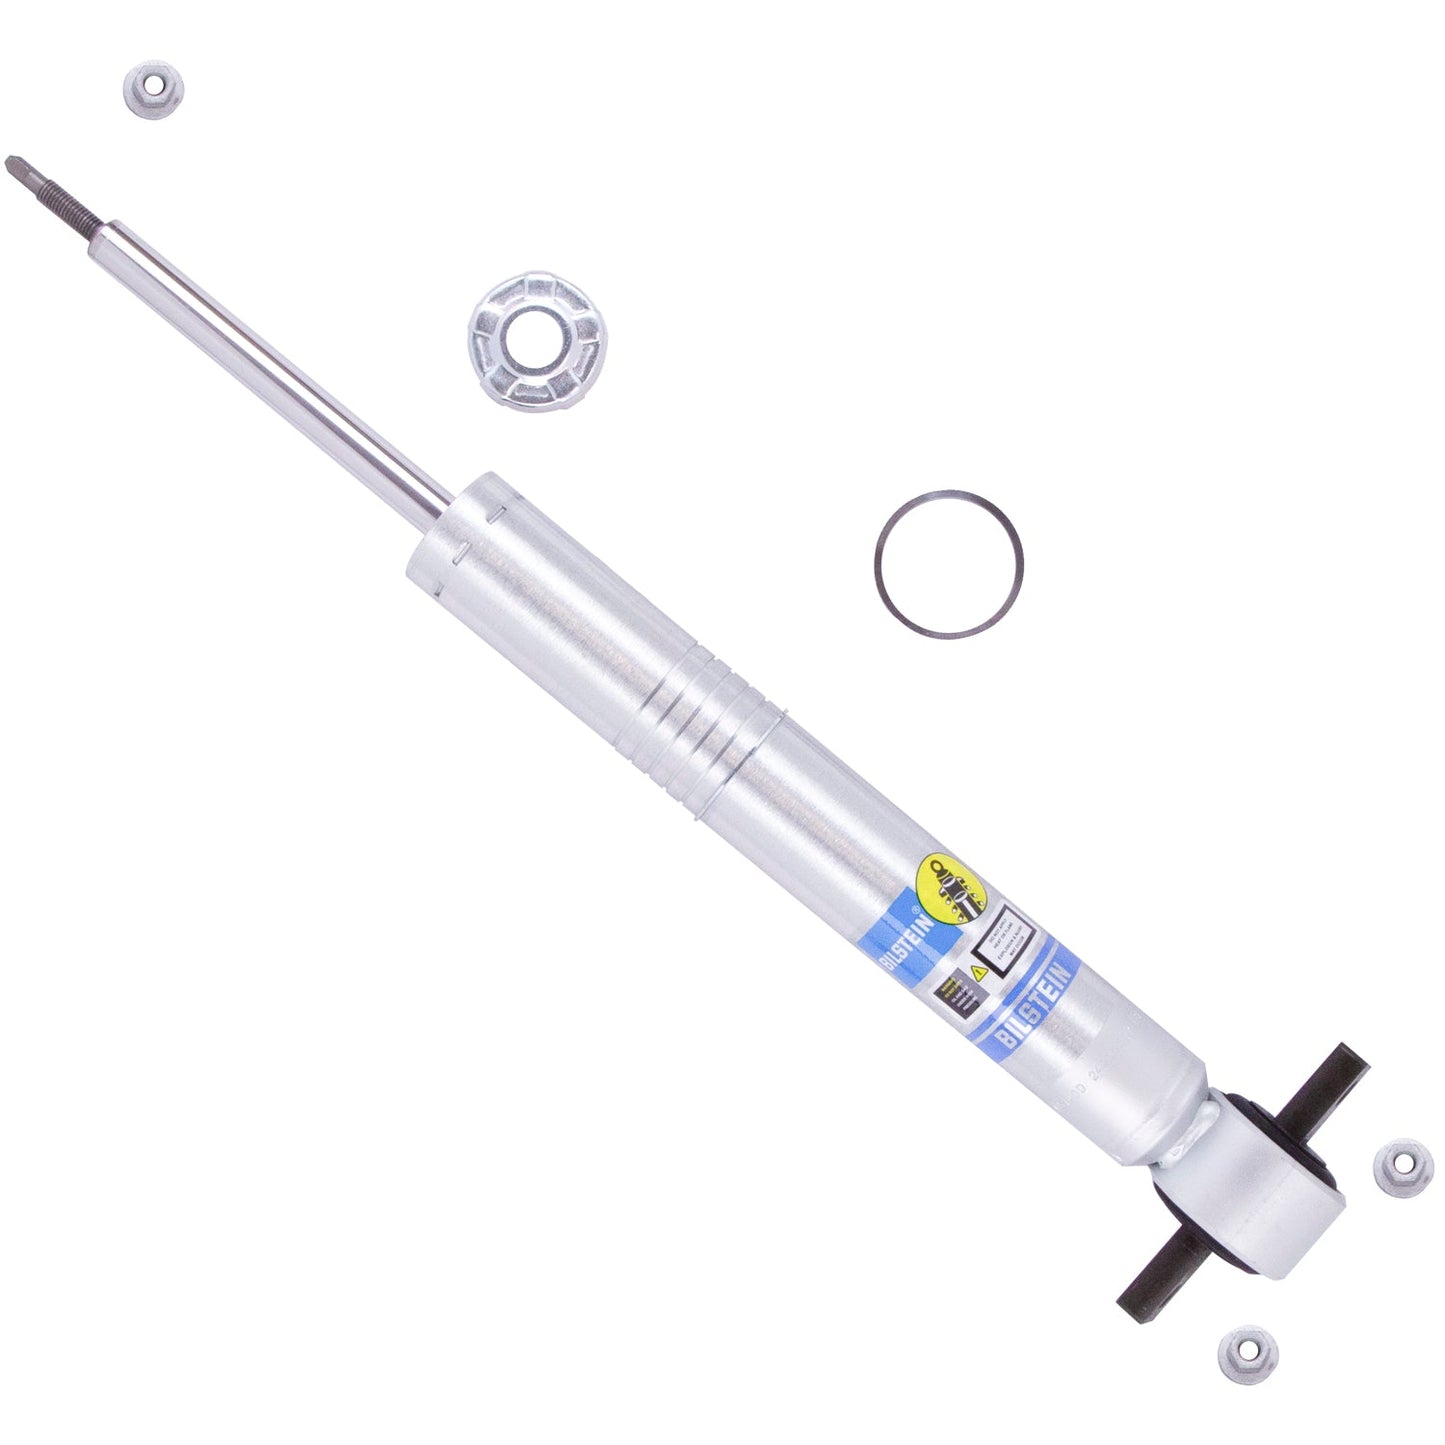 Stage 1 Package Bilstein 2019-2023 GMC 1500 AT4, Silverado 1500 Trailboss 5100 Series Front And Rear Shocks 0-1.1 in Front Lift